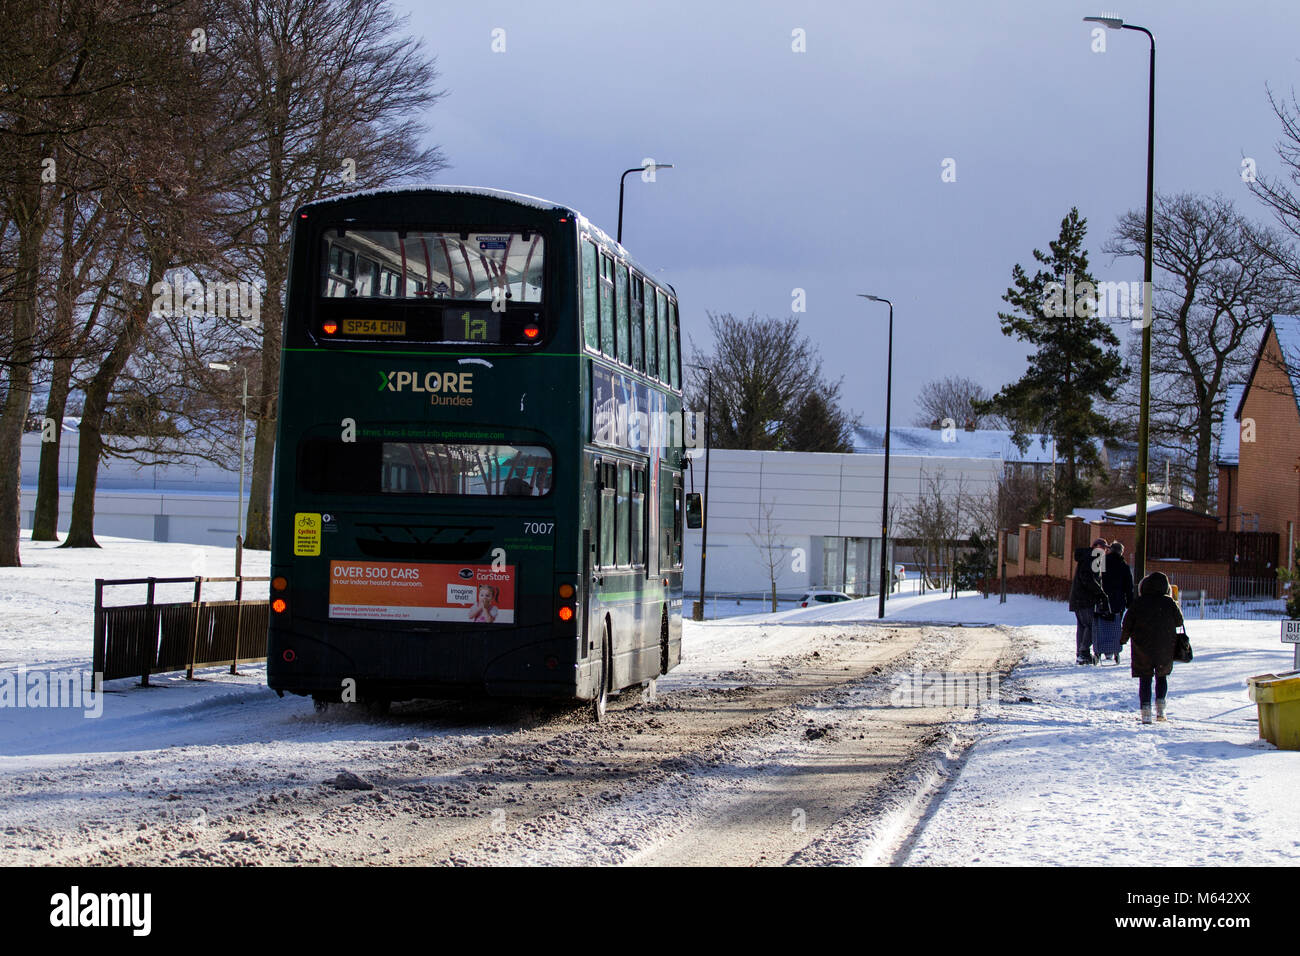 Dundee, Scotland, UK, 28th February, 2018. UK Weather. The Siberian Beast arrives over the north east of Scotland with heavy snow falls and blustery cold winds sweeping across Dundee. Freezing weather from Serbia known as 'The Beast from the East' is set to cause travel disruption and school closures as Britain faces its coldest February in years. Credits: Dundee Photographics/Alamy Live News Stock Photo